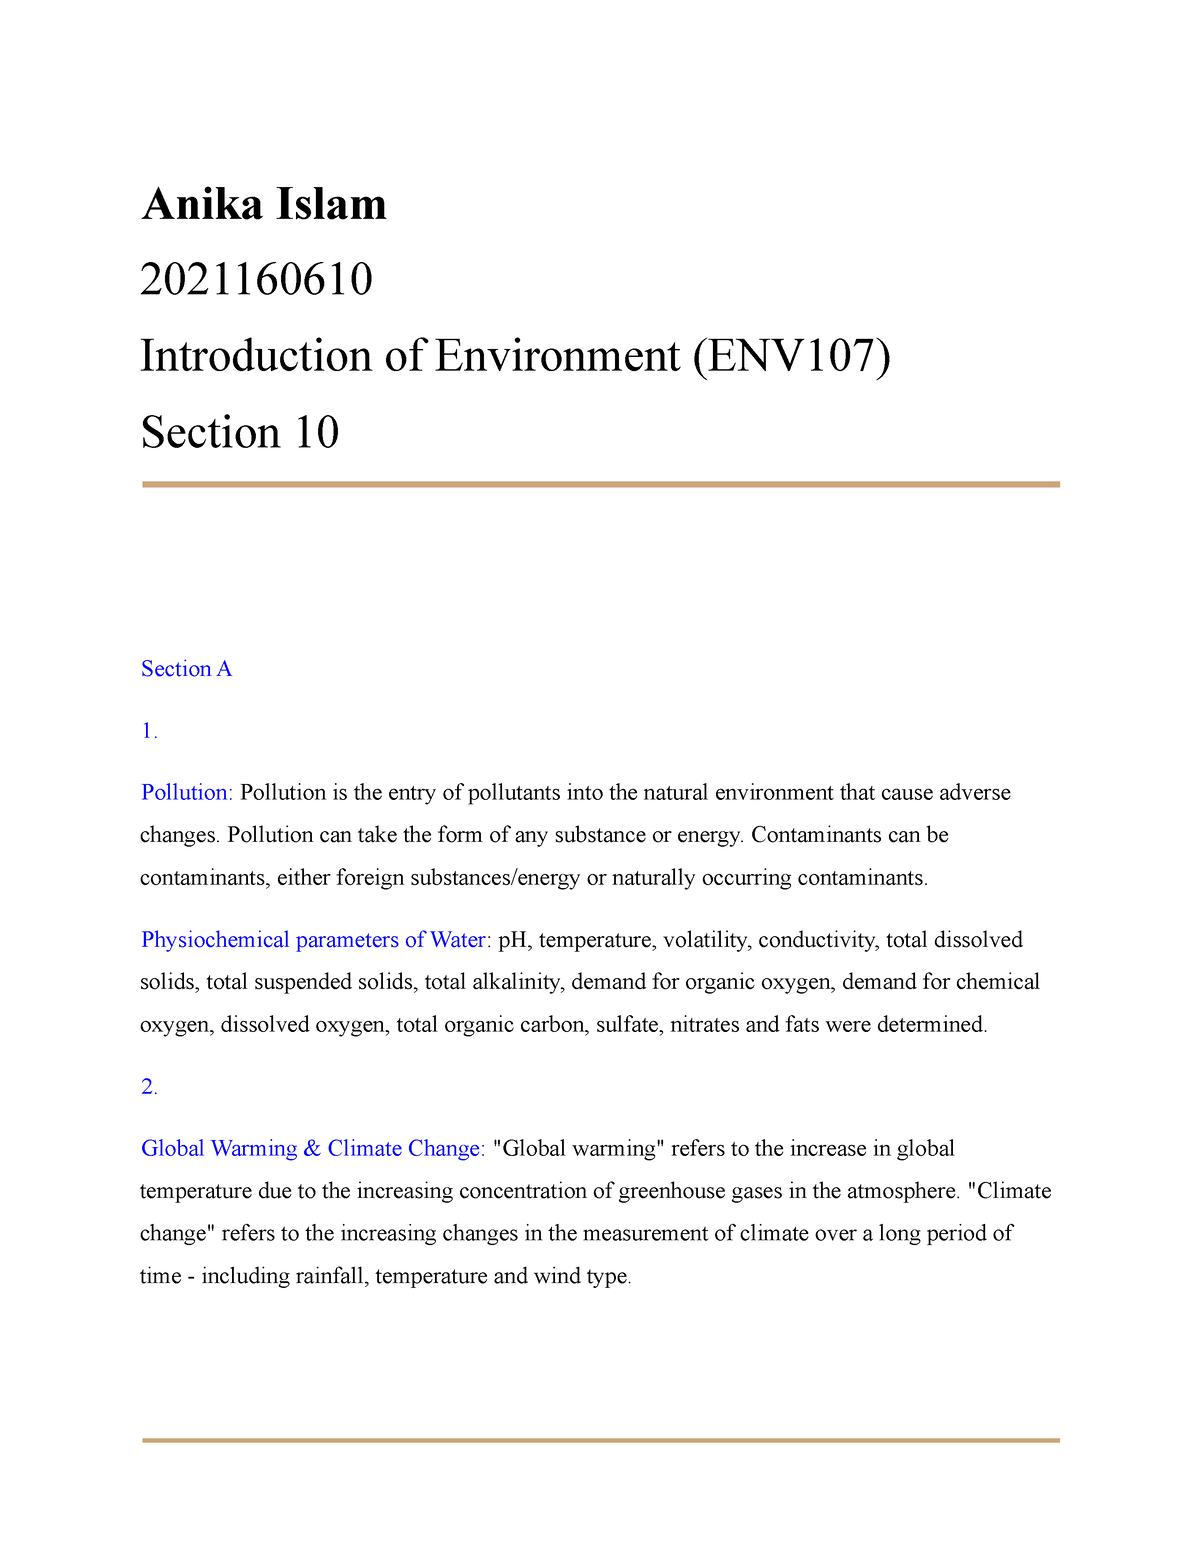 Answer Final EXAM - Anika Islam 2021160610 Introduction of Environment ...